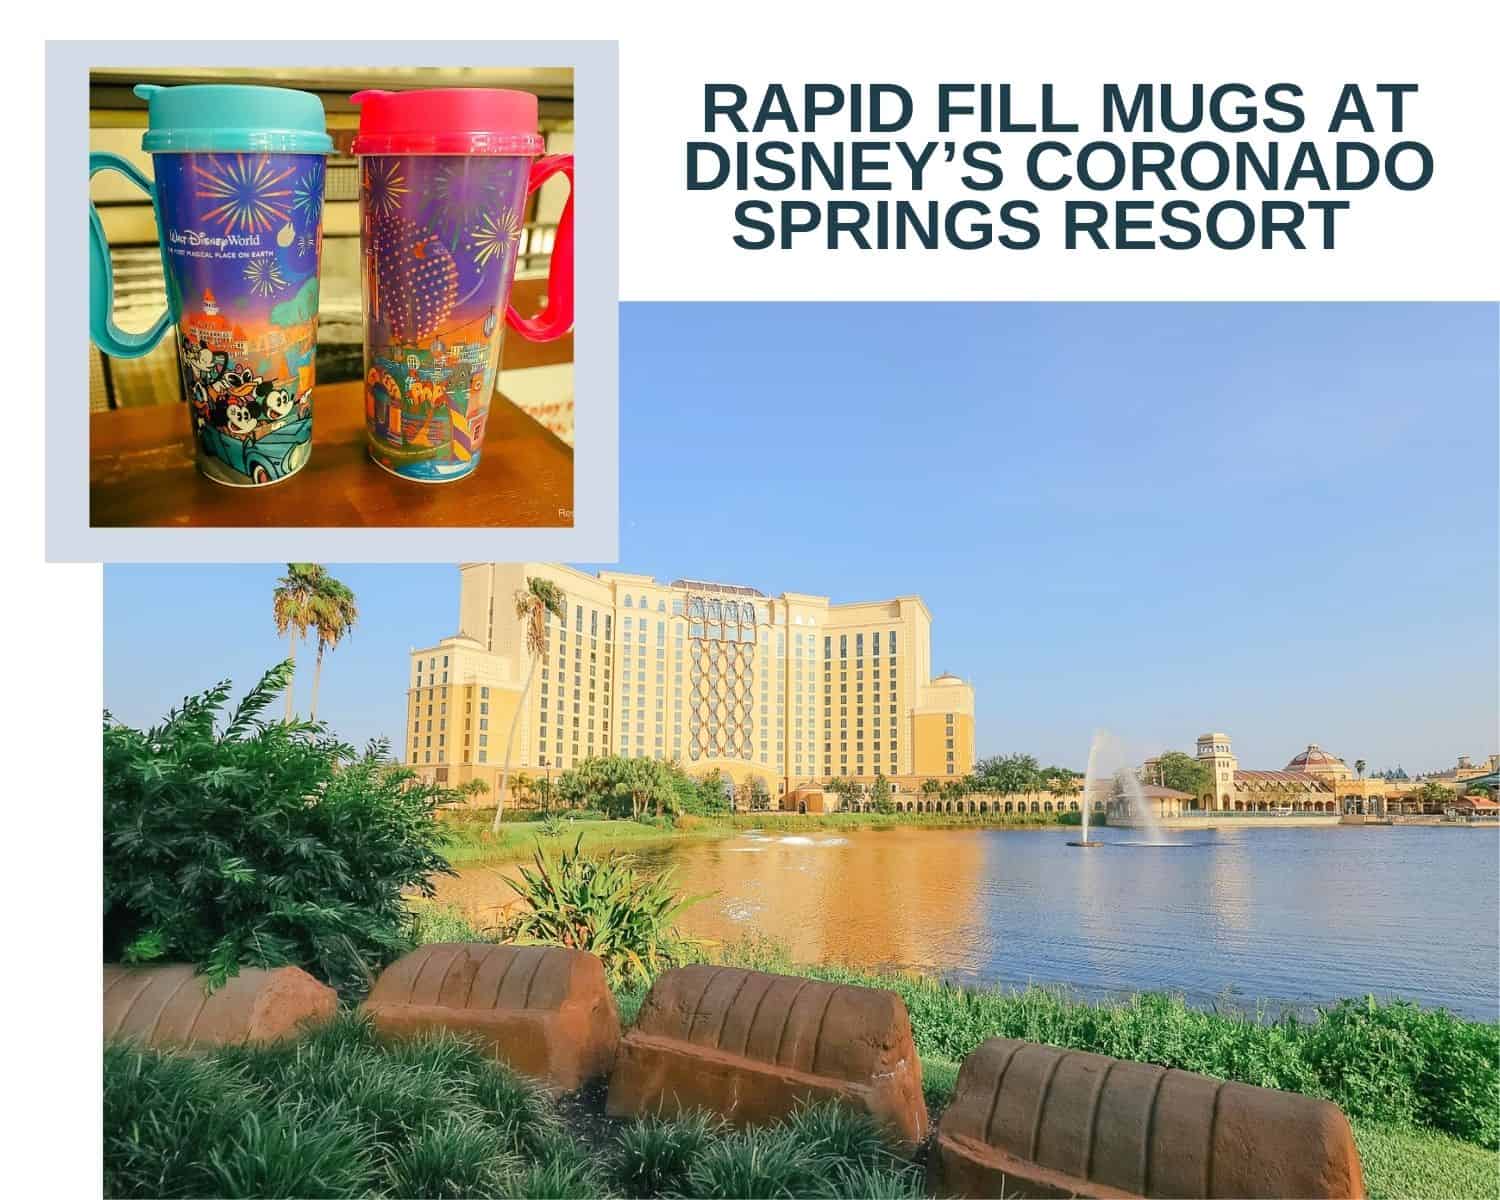 The 2 Places to Refill Rapid Fill Mugs at Disney’s Coronado Springs